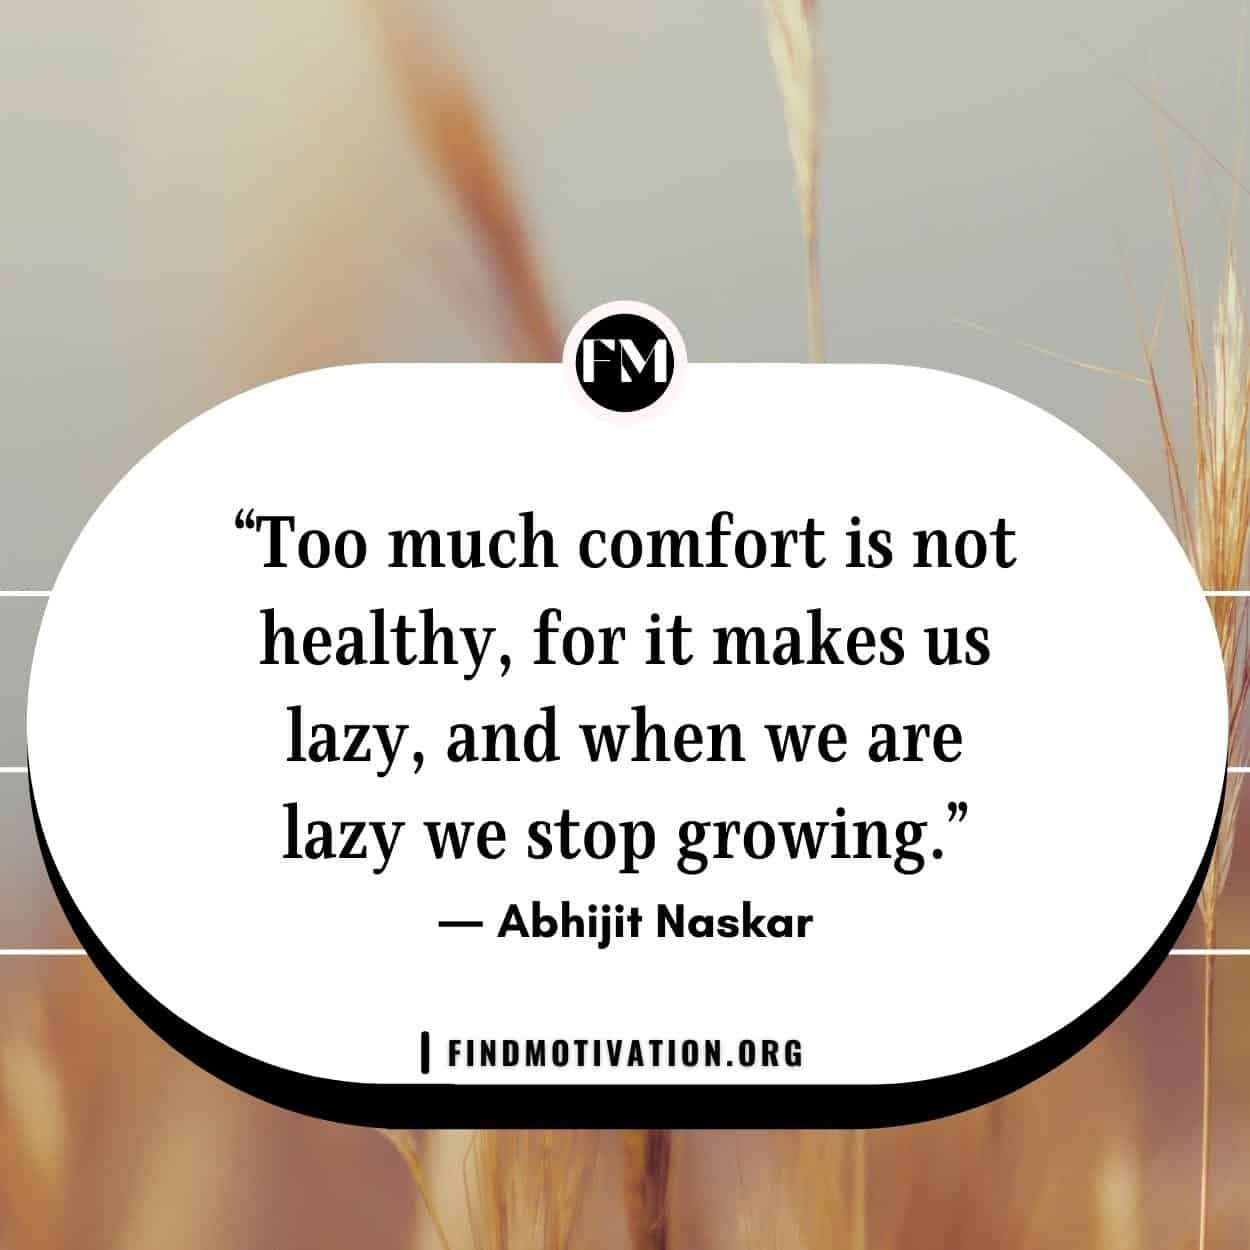 Motivational healthy lifestyle Quotes to lead a happy lifestyle